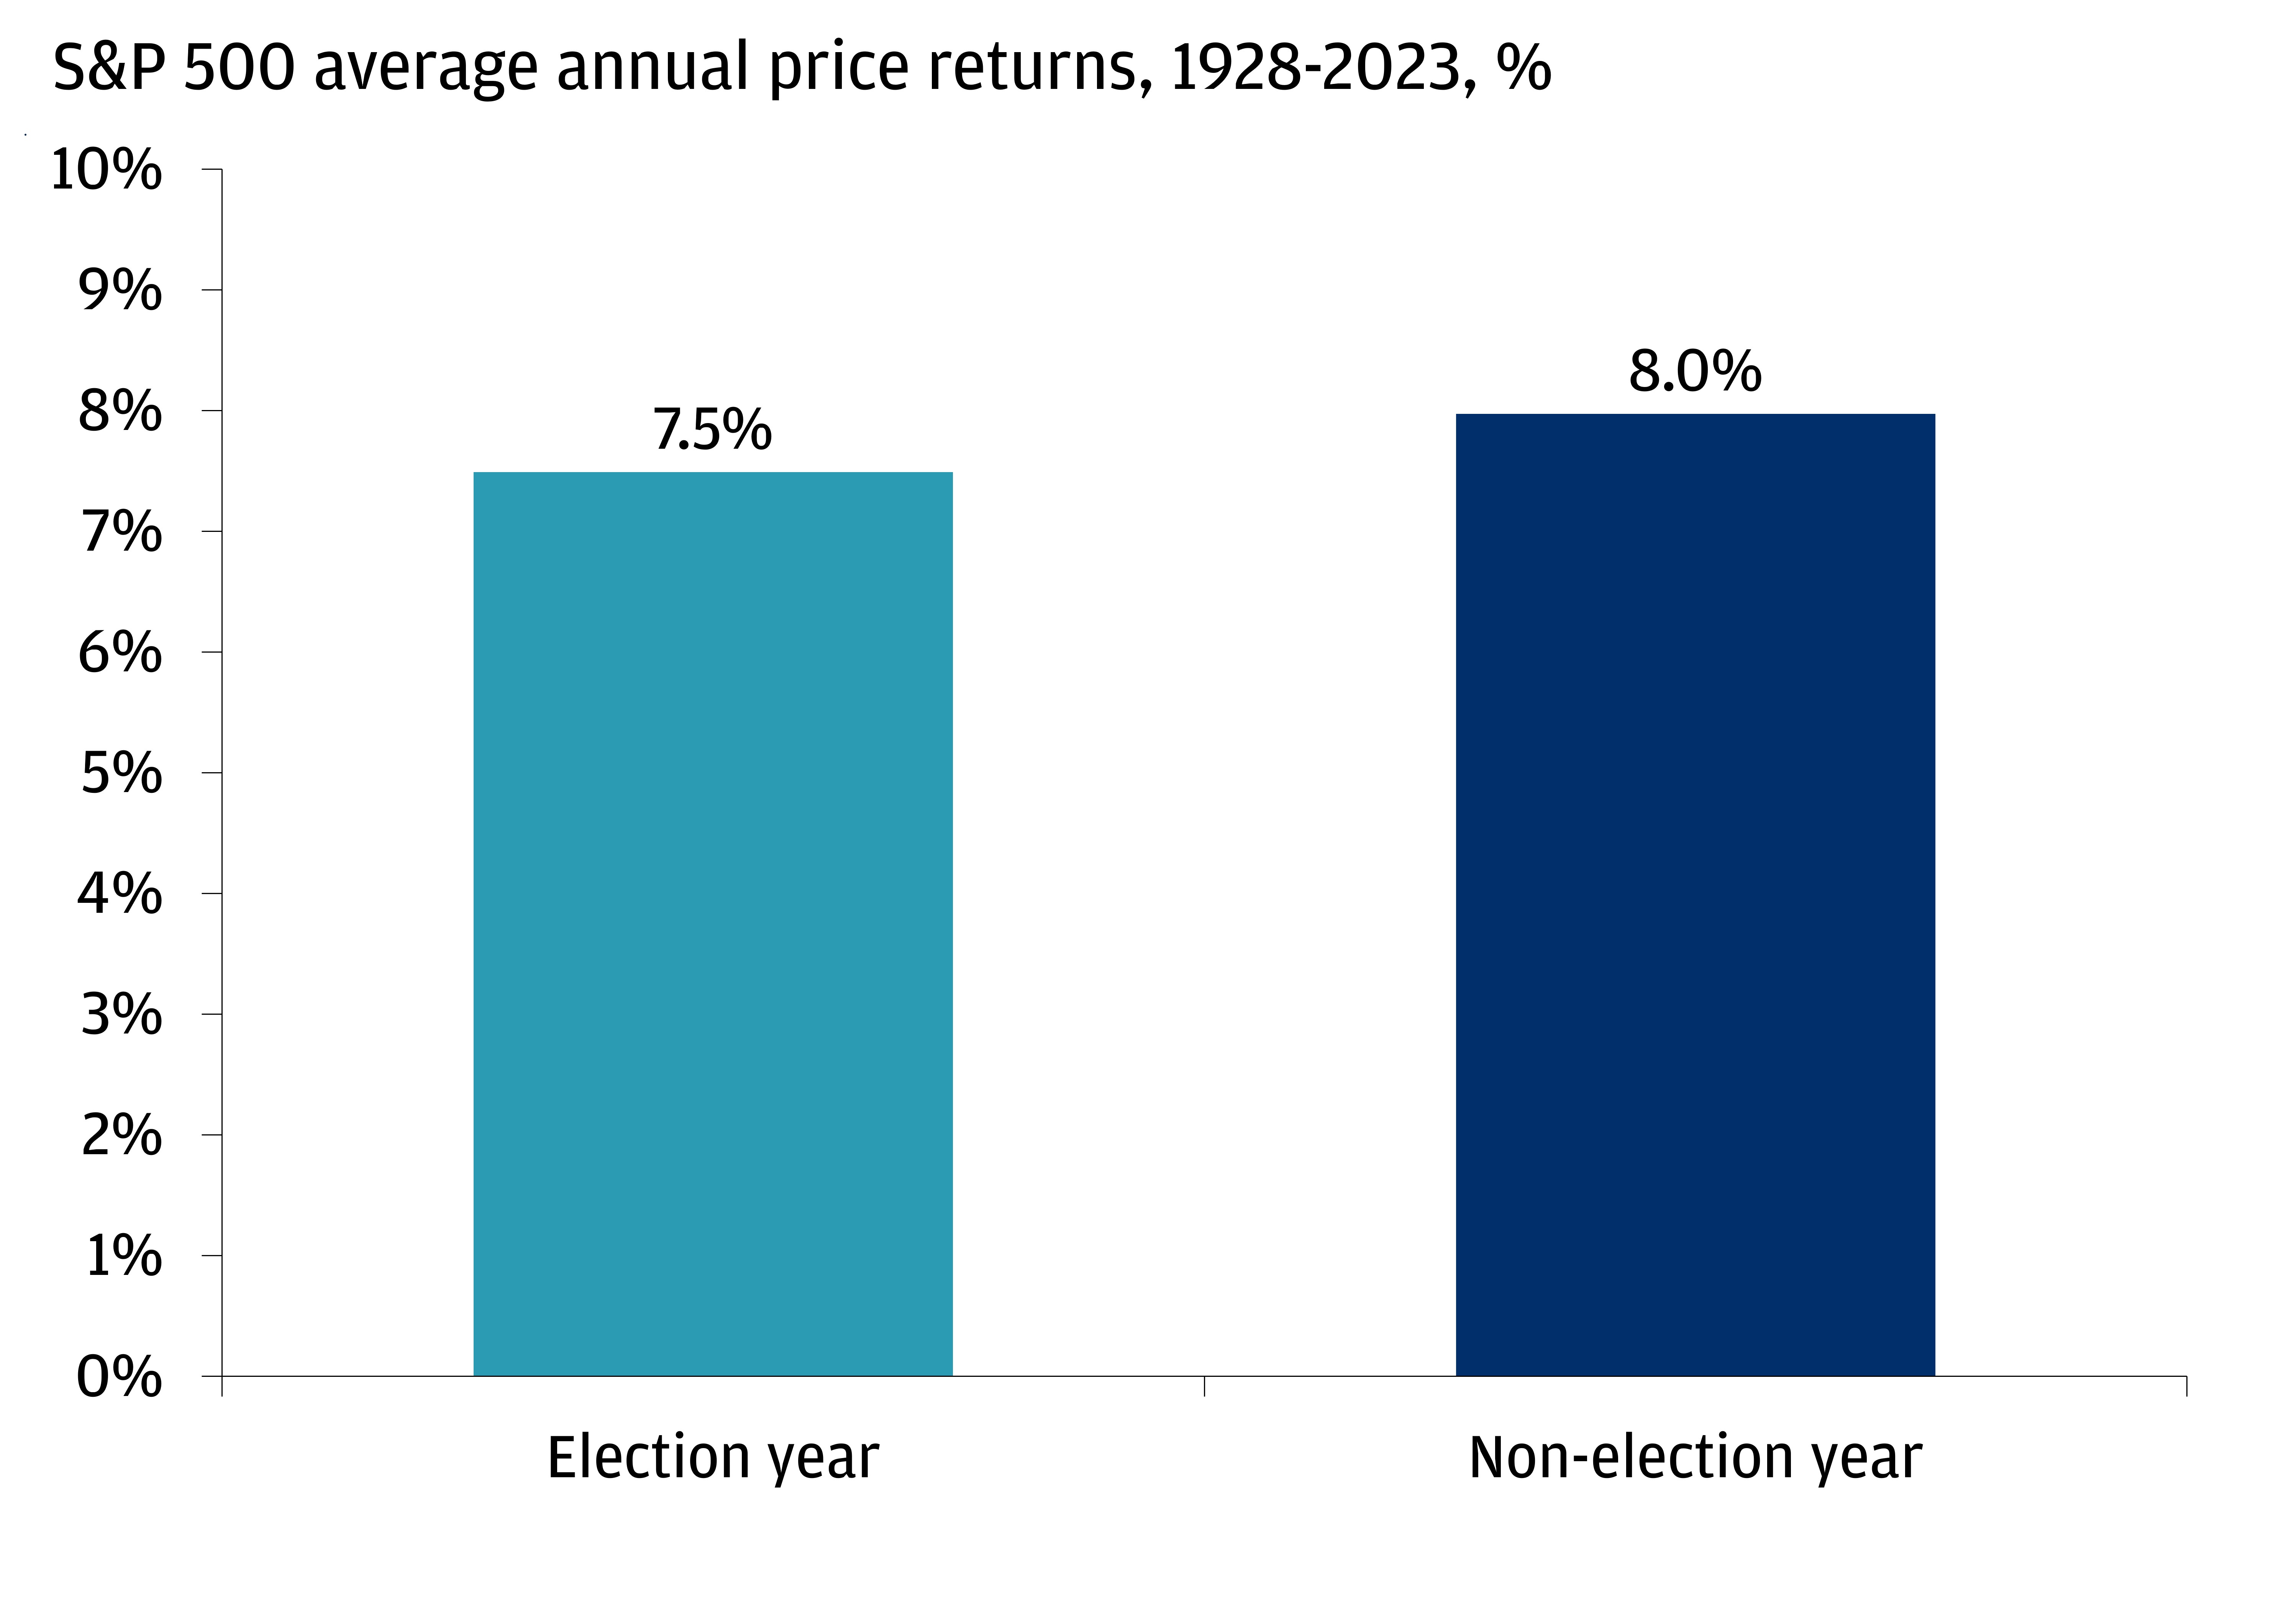 The chart shows the S&P 500 average annual price returns from 1926 to 2023 in election years versus non-election years.